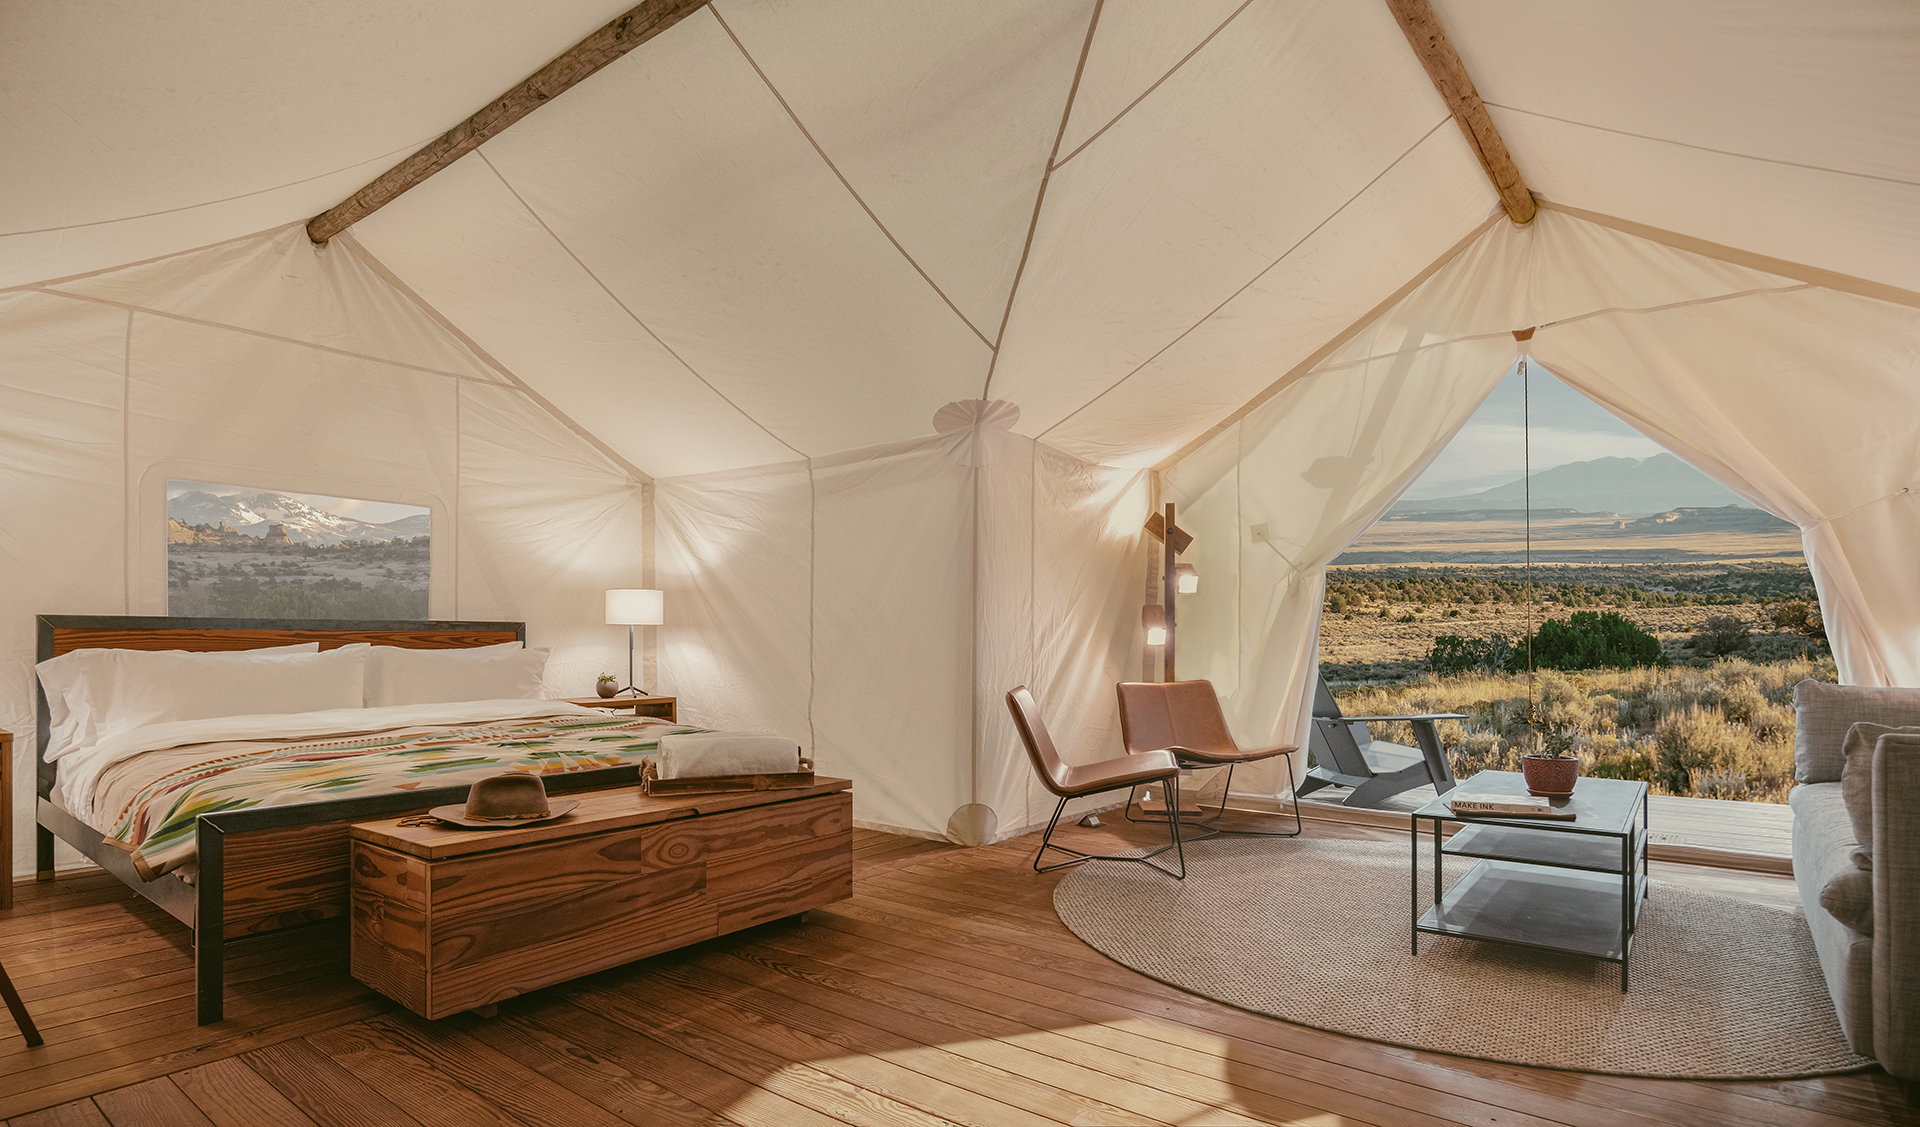 Suite Tent interior at ULUM Moab featuring Pendleton wool blankets and Parachute Linens